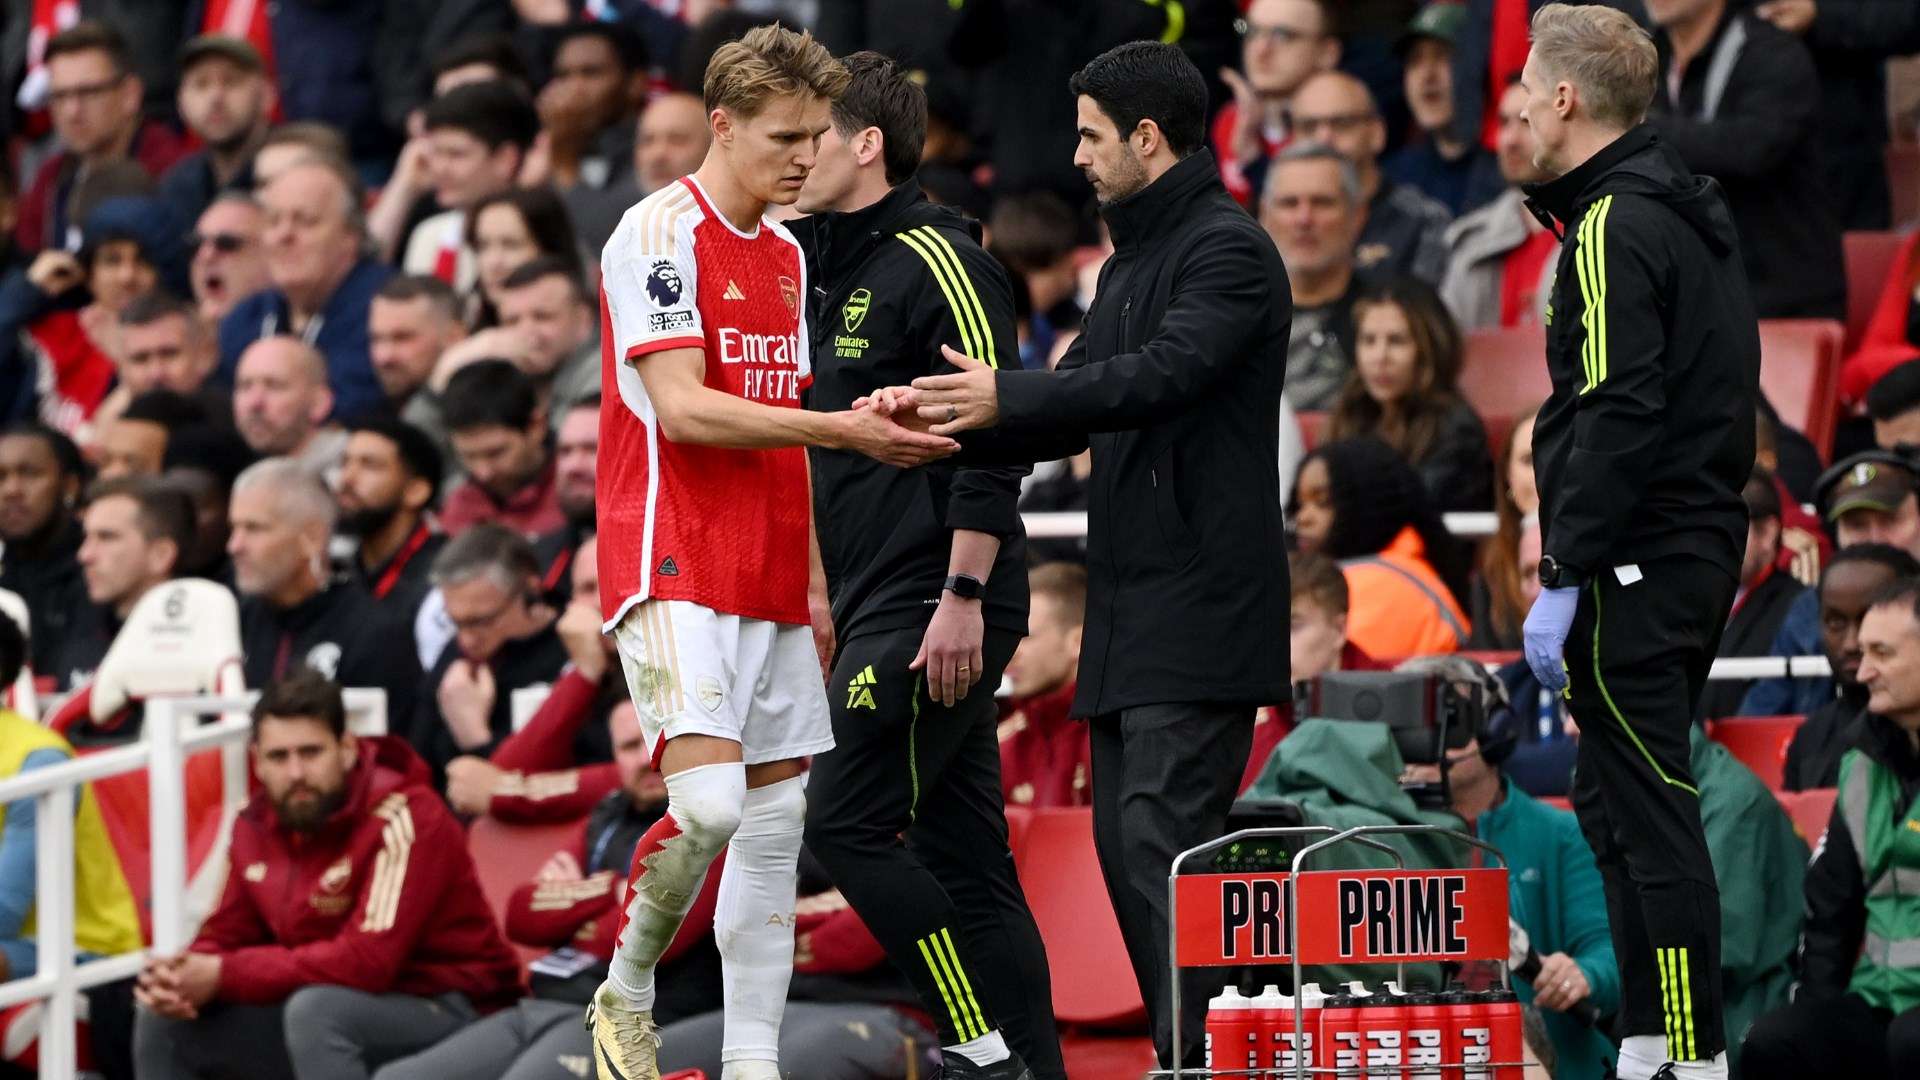 Why was Martin Odegaard hooked? Mikel Arteta explains shock substitution call as Arsenal slump to disastrous 2-0 defeat against Aston Villa after captain's withdrawal | Goal.com